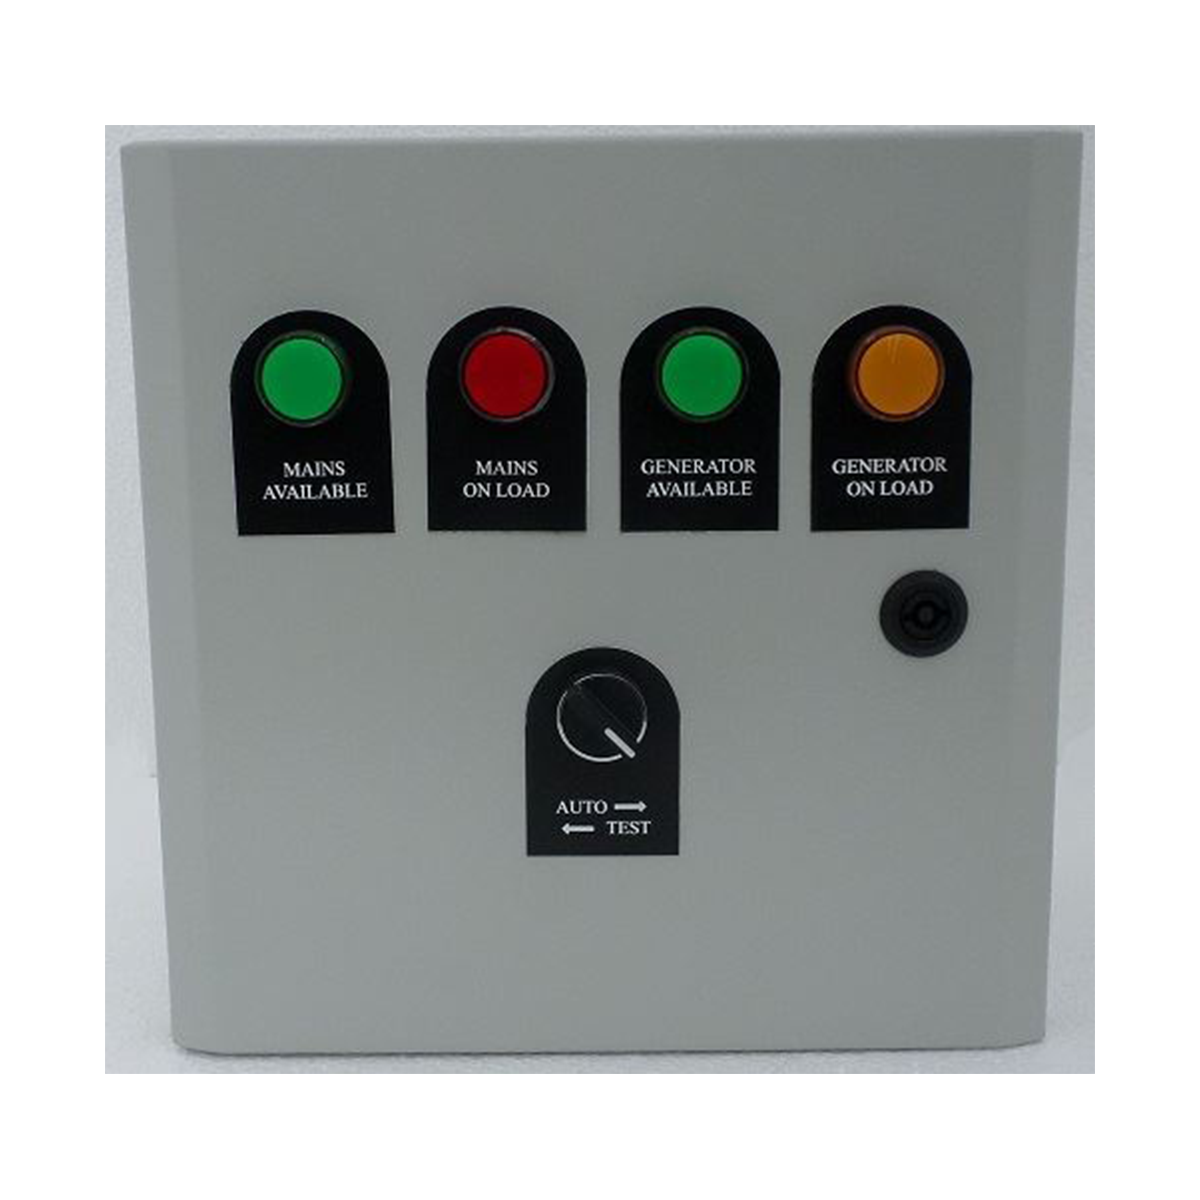 Hyundai ATS Automatic Transfer Switch Package for Single Phase Hyundai 3000RPM Diesel Generators